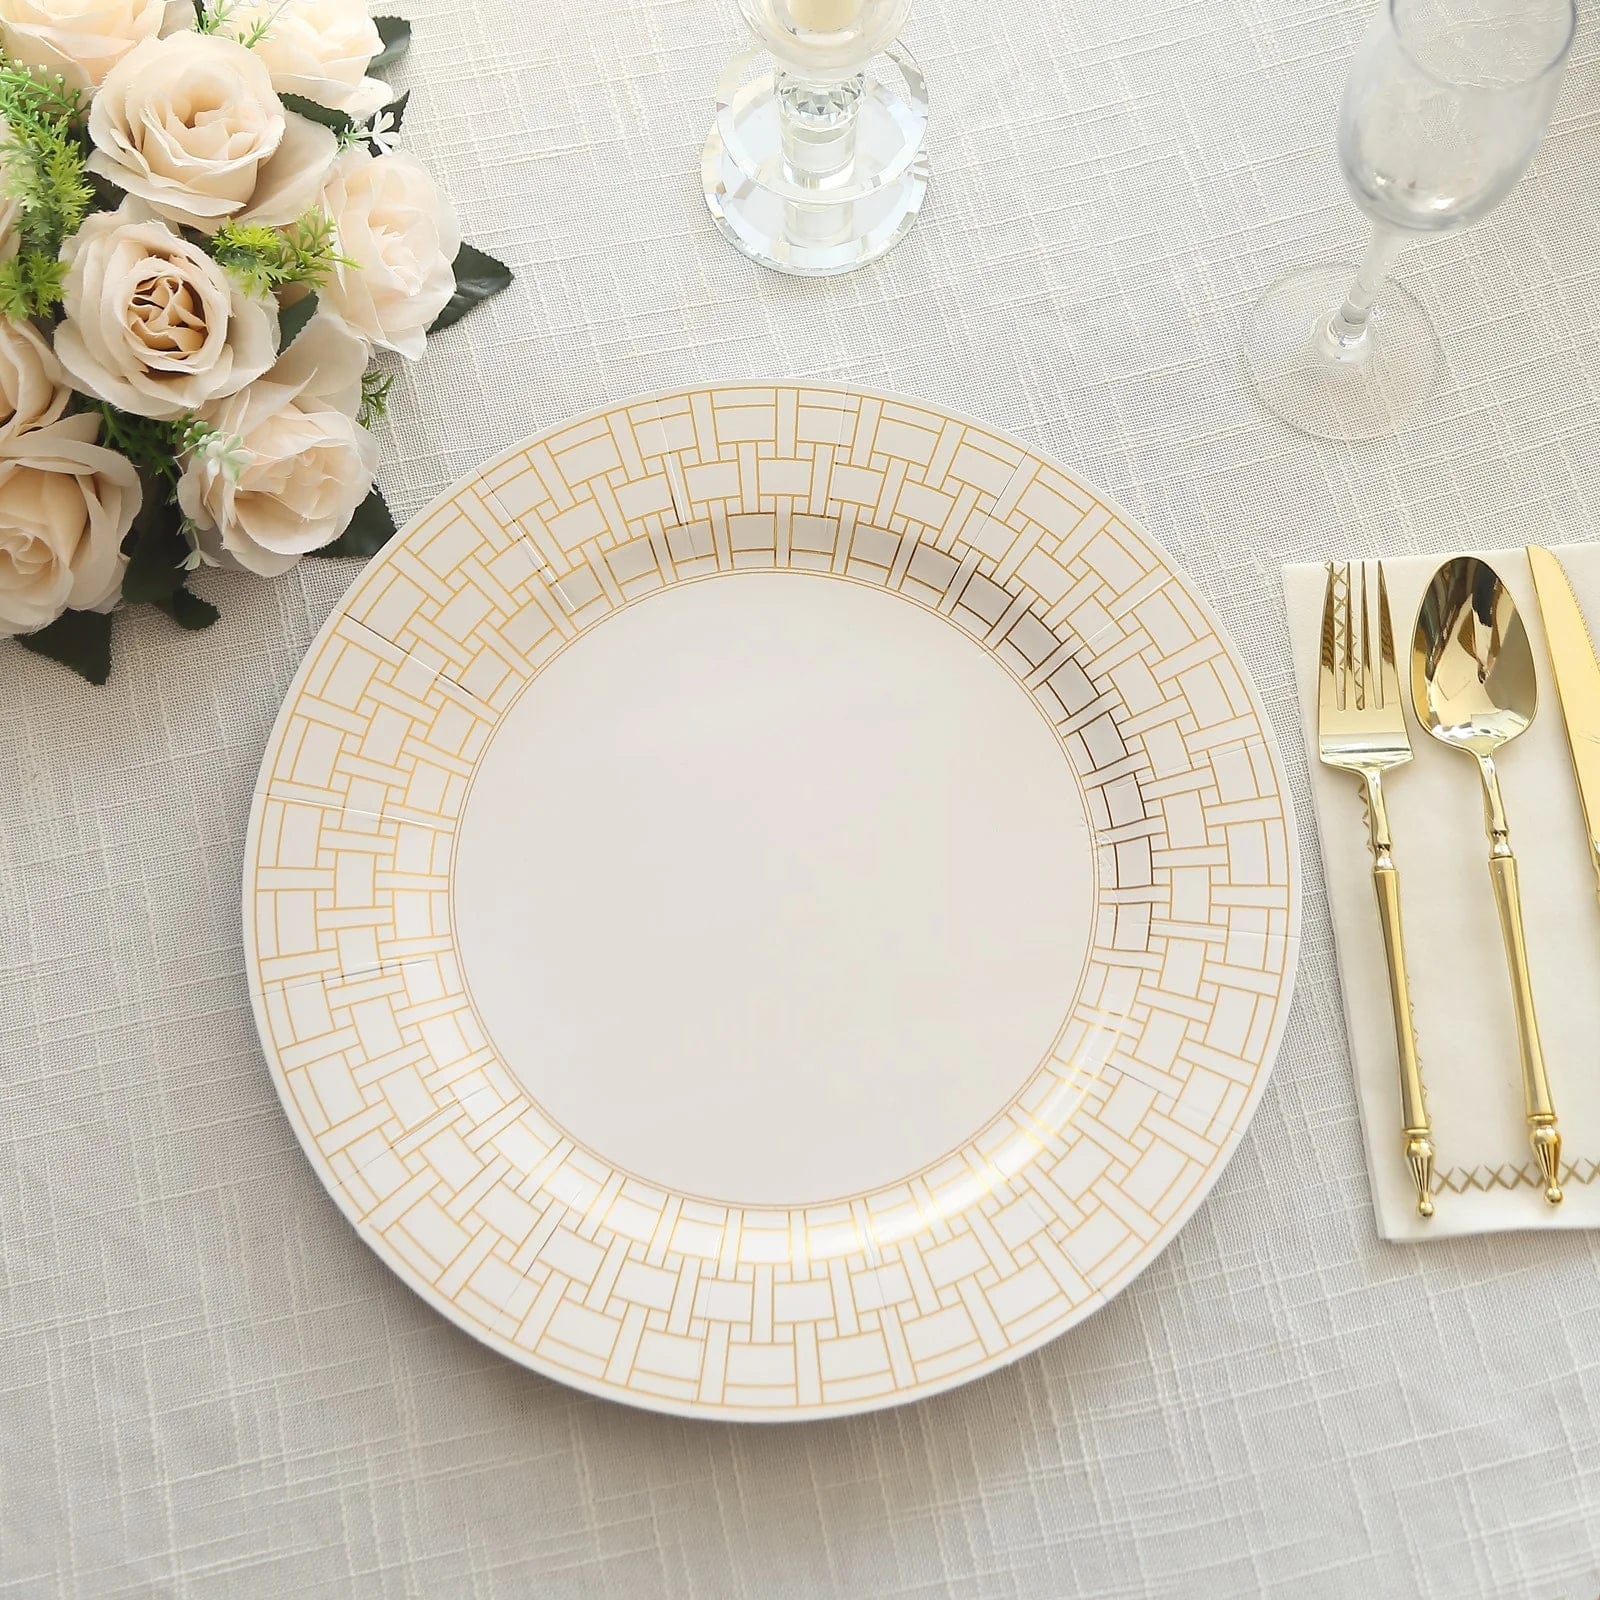 10 White Disposable Paper Charger Plates with Gold Basketweave Design Rim